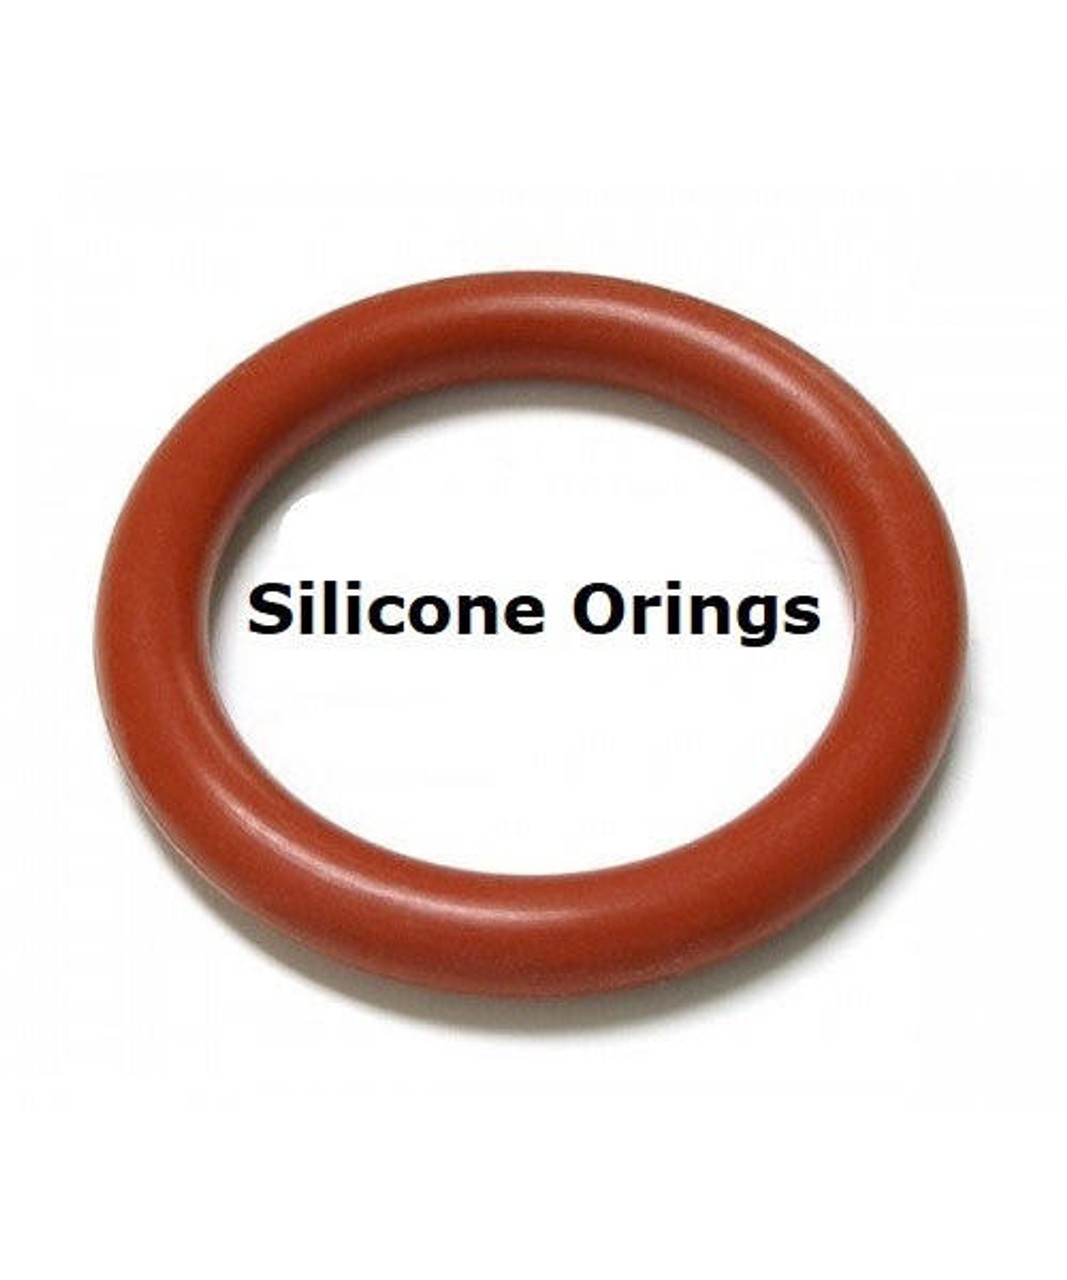 Silicone O-rings Size 430 Price for 1 pc